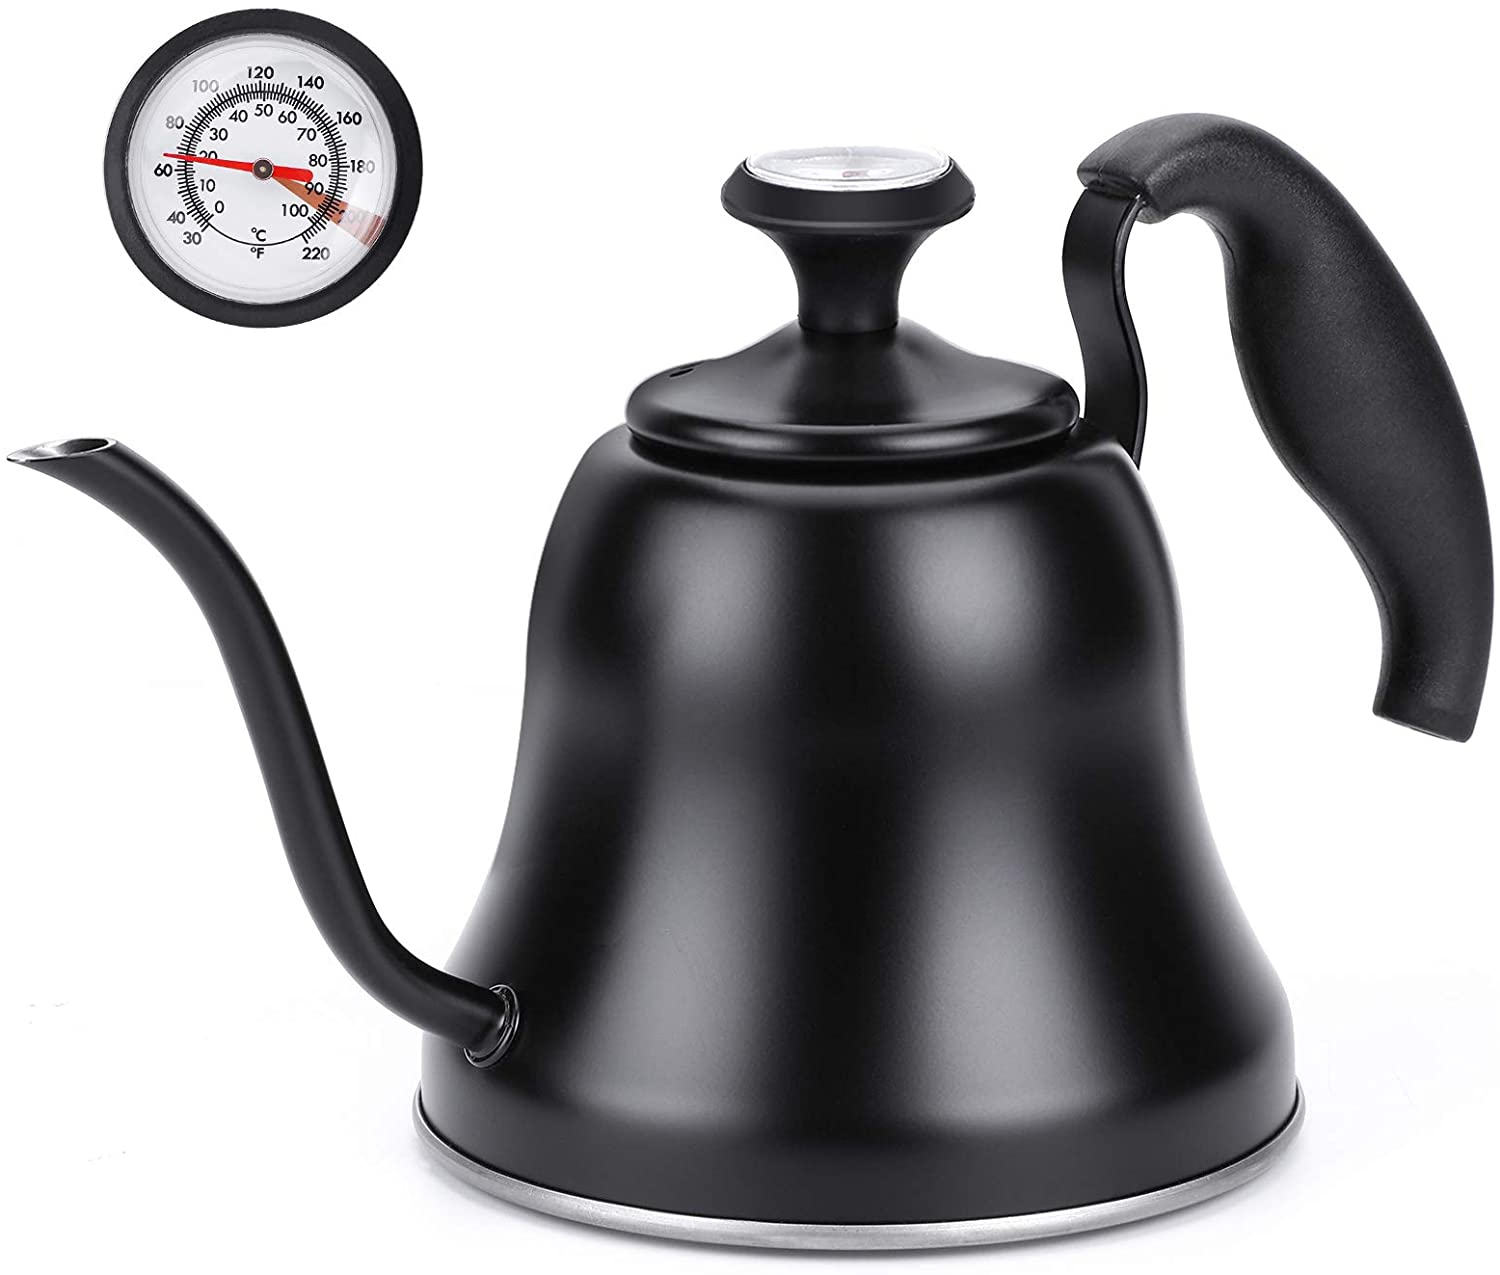 Tea Kettle with Thermometer for Stove Top Gooseneck Kettle, Small Pour Over  Coffee Kettle, Goose Neck Tea Pot Stovetop Teapot, Hot Water Heater Boiler